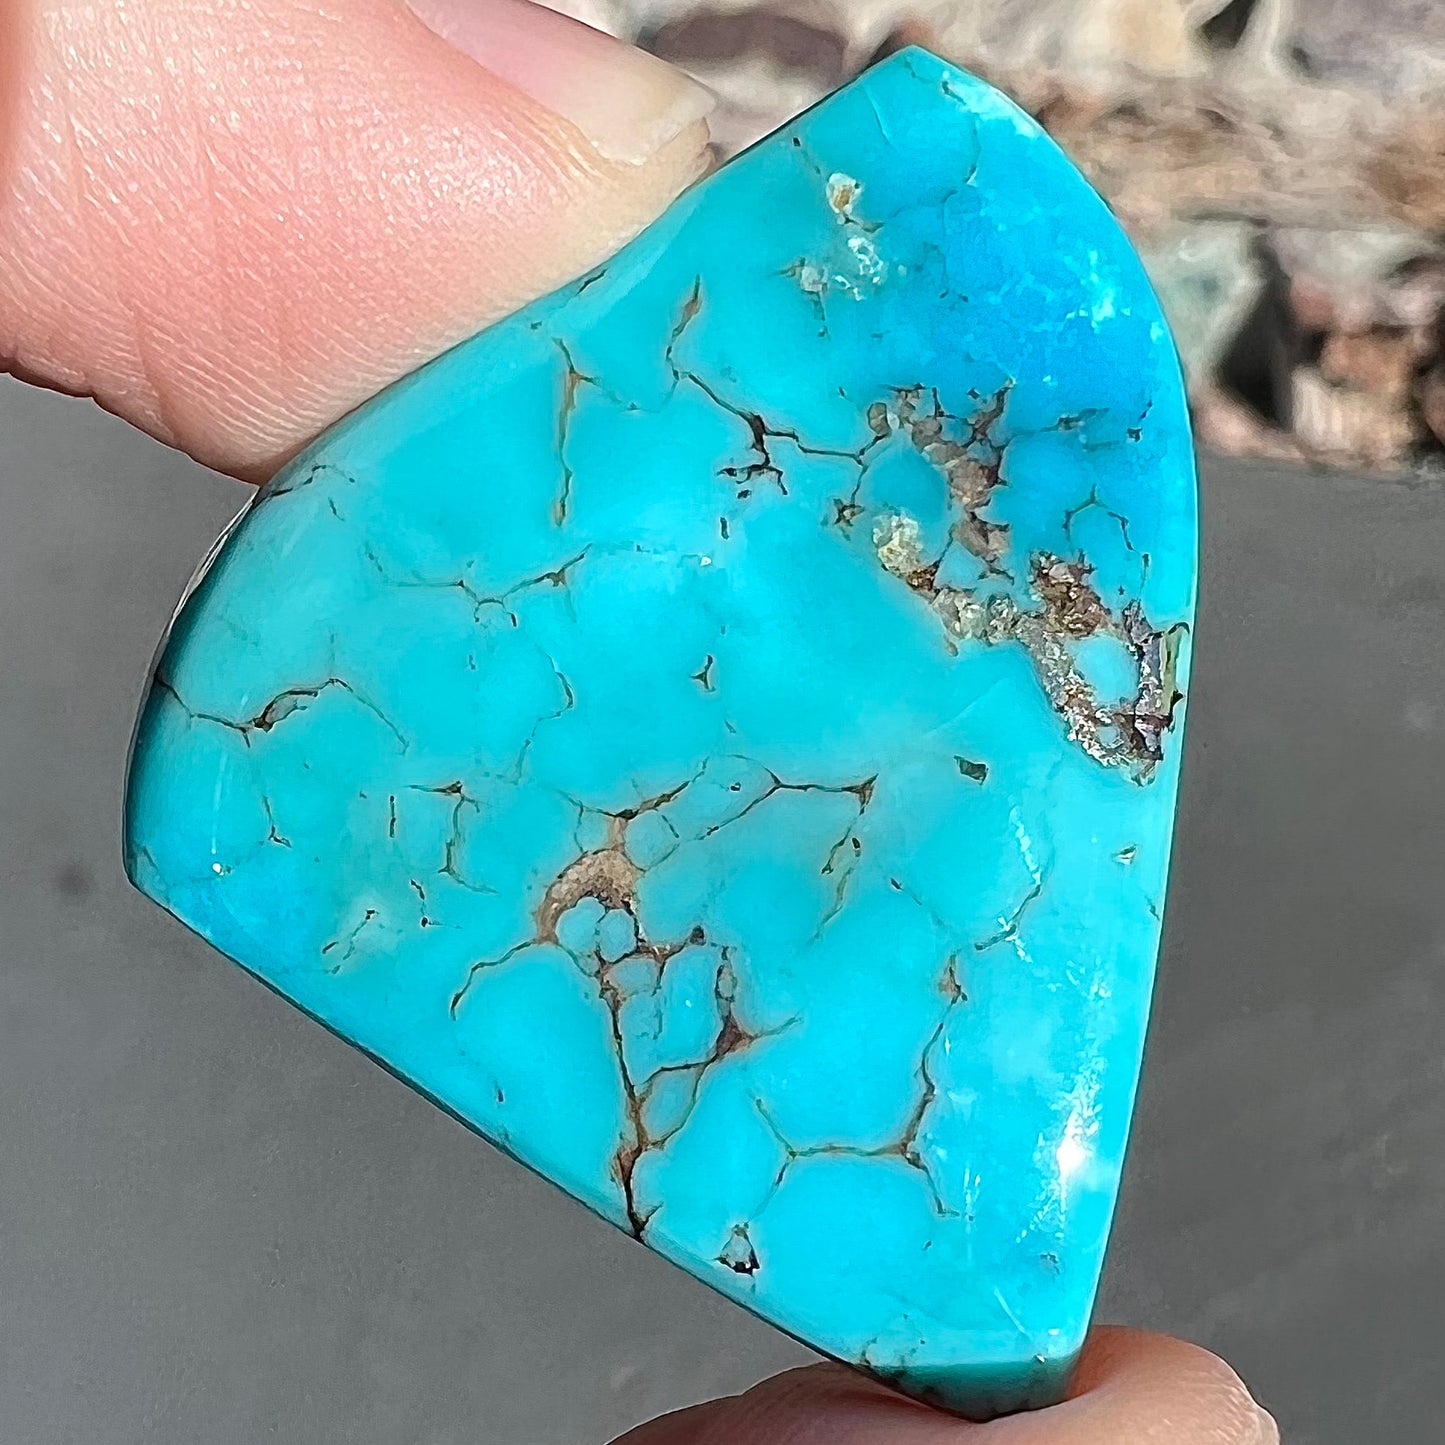 A loose, polished freeform piece of blue turquoise from the Sleeping Beauty Mine in Arizona.